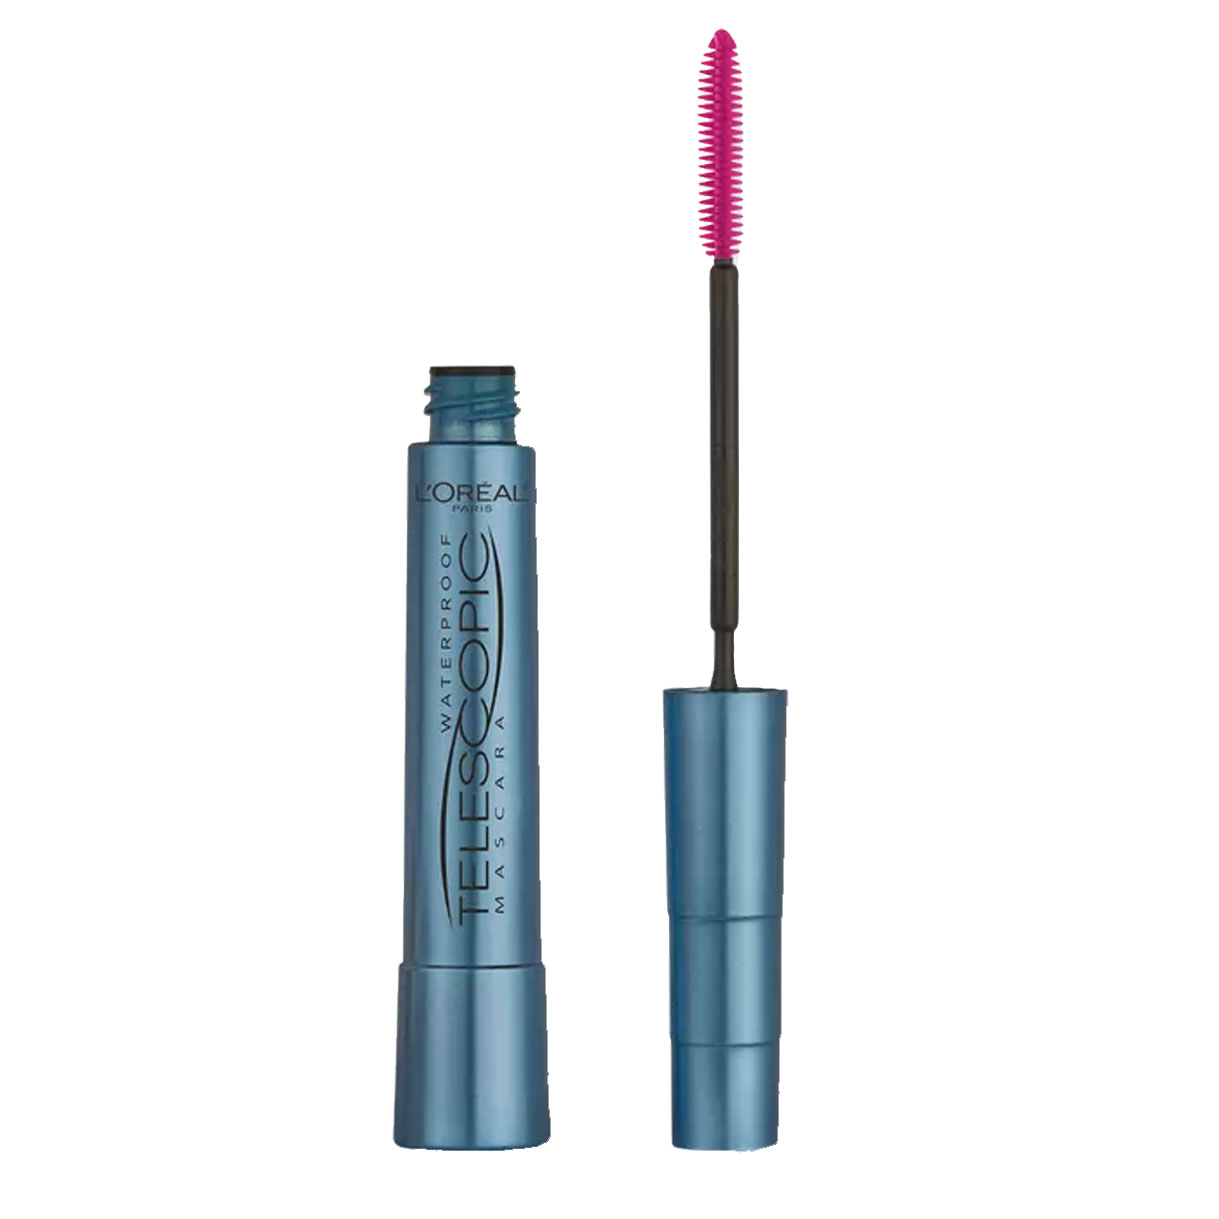 L'Oréal Telescopic Original Waterproof Mascara in a blue tube with a pink wand